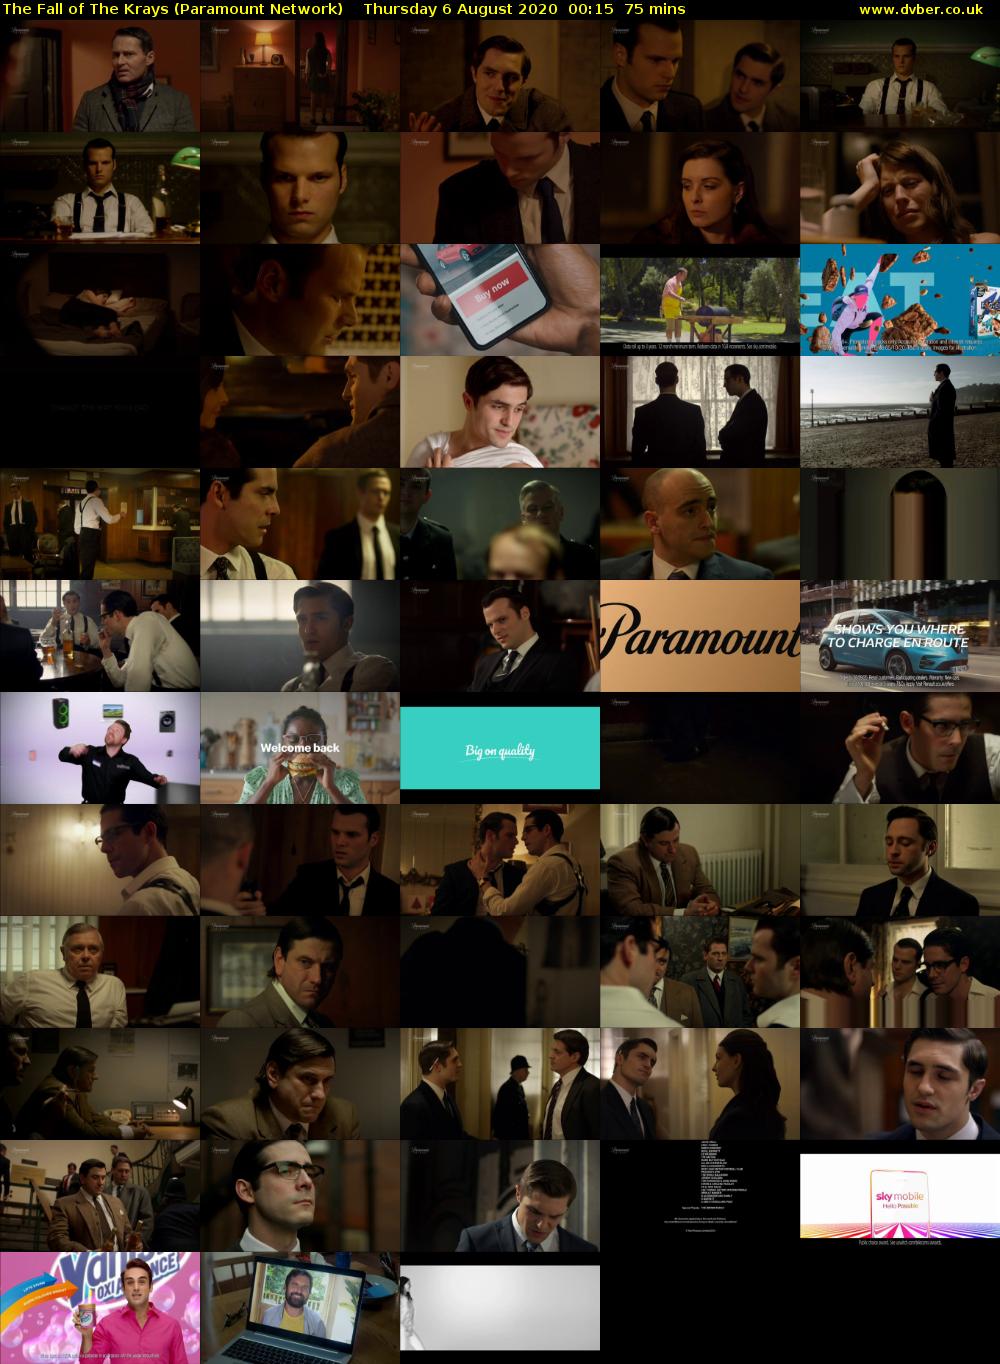 The Fall of The Krays (Paramount Network) Thursday 6 August 2020 00:15 - 01:30